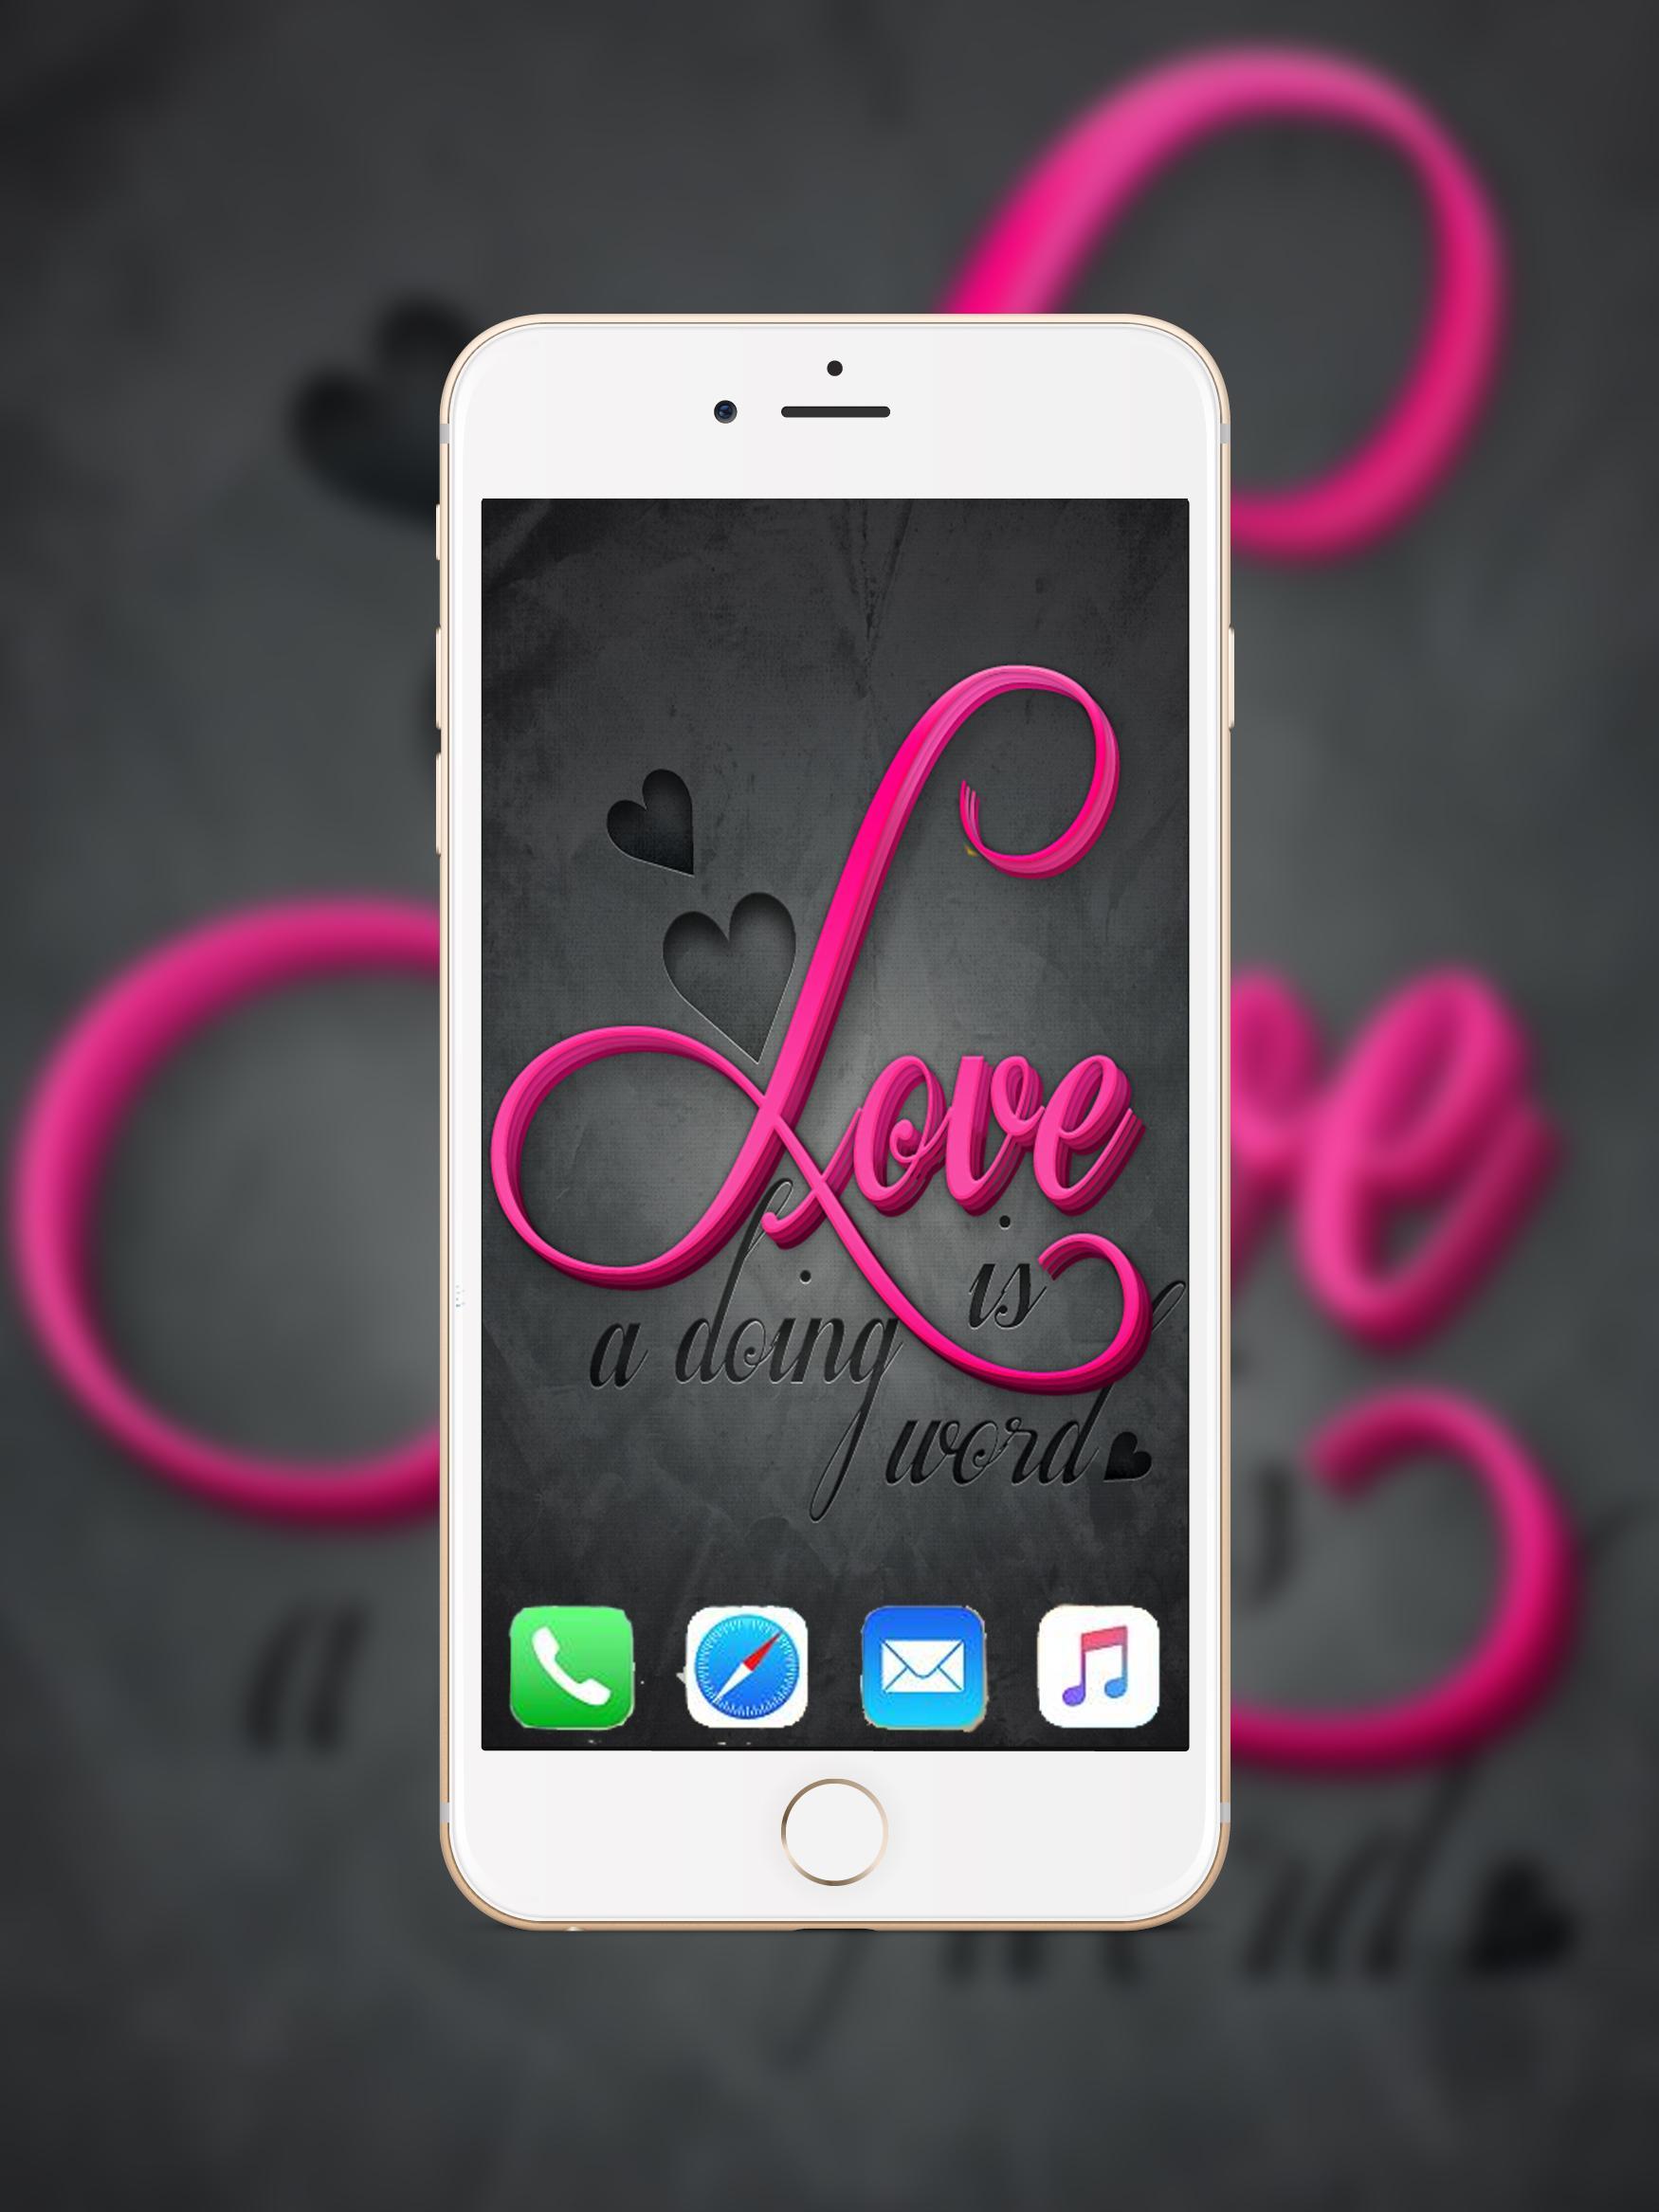 Love Wallpaper With Quotes Downloader Apk Pictures 3 Wallpaper All of the quotes wallpapers bellow have a minimum hd resolution (or 1920x1080 for the tech guys) and are easily downloadable by clicking the image and saving it. 3 wallpaper